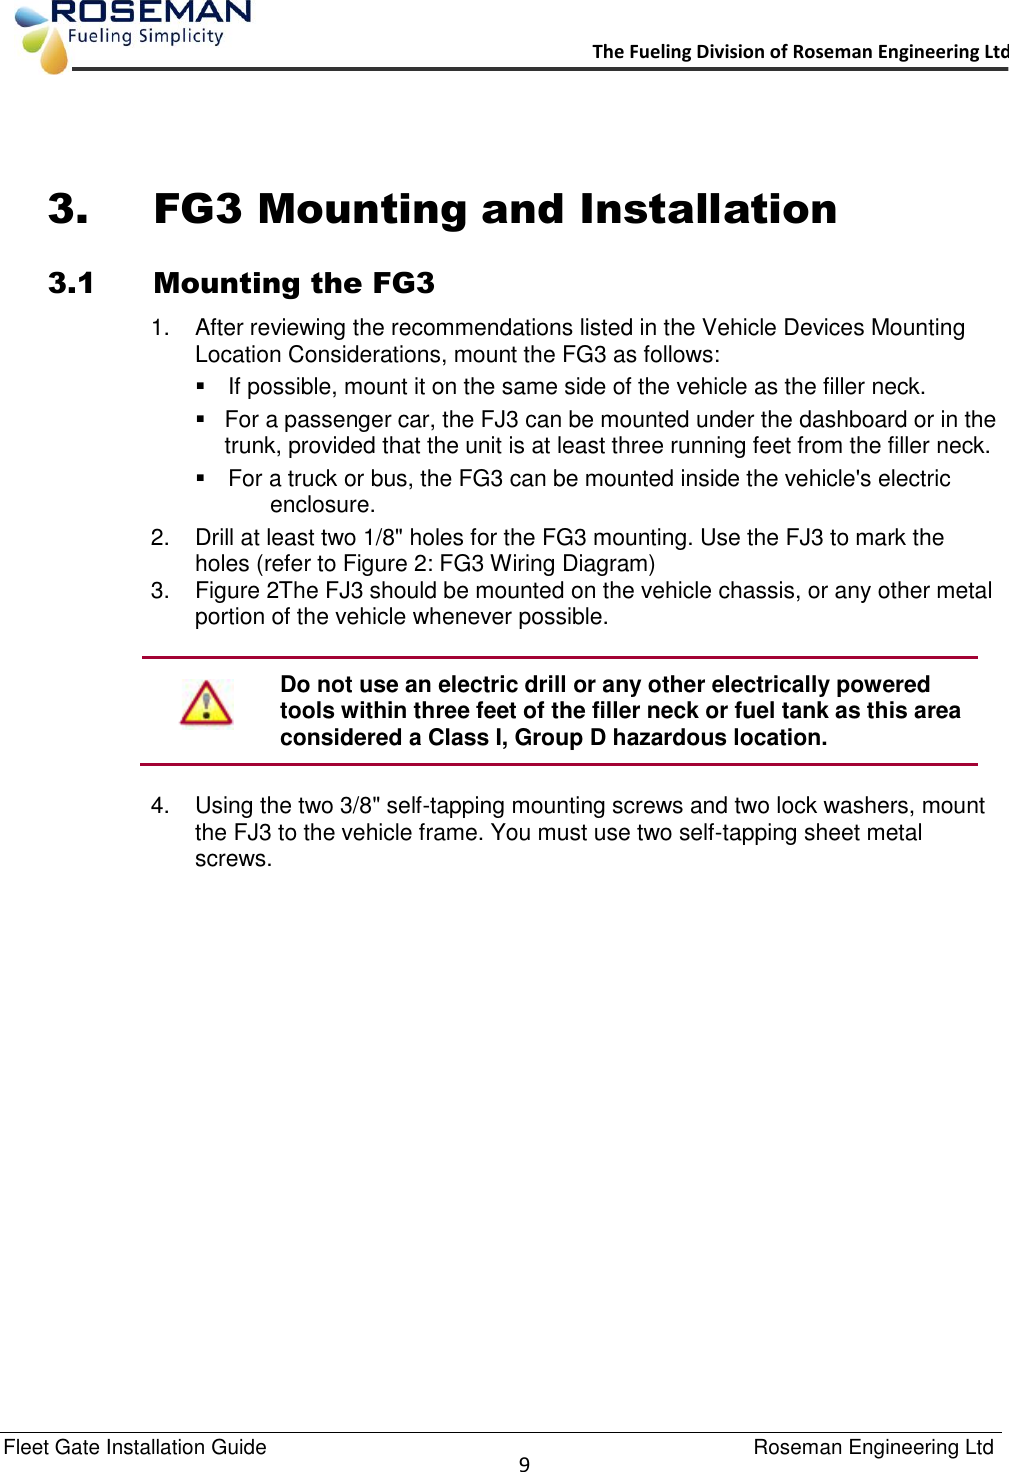   Fleet Gate Installation Guide                                                                                    Roseman Engineering Ltd  9      The Fueling Division of Roseman Engineering Ltd.                                                                  3. FG3 Mounting and Installation  3.1 Mounting the FG3 1.  After reviewing the recommendations listed in the Vehicle Devices Mounting Location Considerations, mount the FG3 as follows:   If possible, mount it on the same side of the vehicle as the filler neck.    For a passenger car, the FJ3 can be mounted under the dashboard or in the trunk, provided that the unit is at least three running feet from the filler neck.   For a truck or bus, the FG3 can be mounted inside the vehicle&apos;s electric enclosure. 2.  Drill at least two 1/8&quot; holes for the FG3 mounting. Use the FJ3 to mark the holes (refer to Figure 2: FG3 Wiring Diagram) 3.  Figure 2The FJ3 should be mounted on the vehicle chassis, or any other metal portion of the vehicle whenever possible.   Do not use an electric drill or any other electrically powered tools within three feet of the filler neck or fuel tank as this area considered a Class I, Group D hazardous location.  4.  Using the two 3/8&quot; self-tapping mounting screws and two lock washers, mount the FJ3 to the vehicle frame. You must use two self-tapping sheet metal screws. 